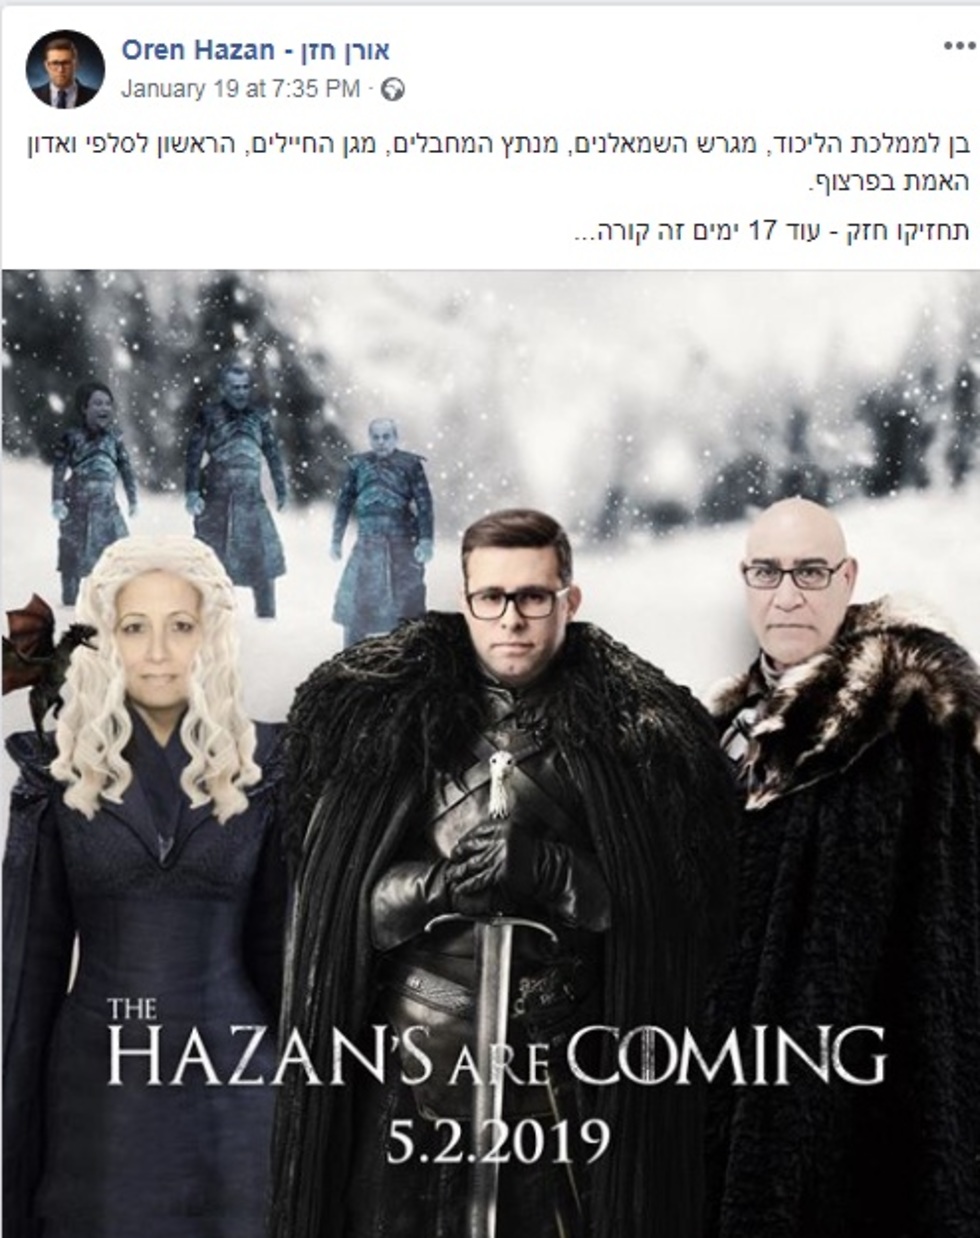 Oren Hazan and his parents appear as characters of hit TV show "Games of Thrones" (Photo: Facebook)